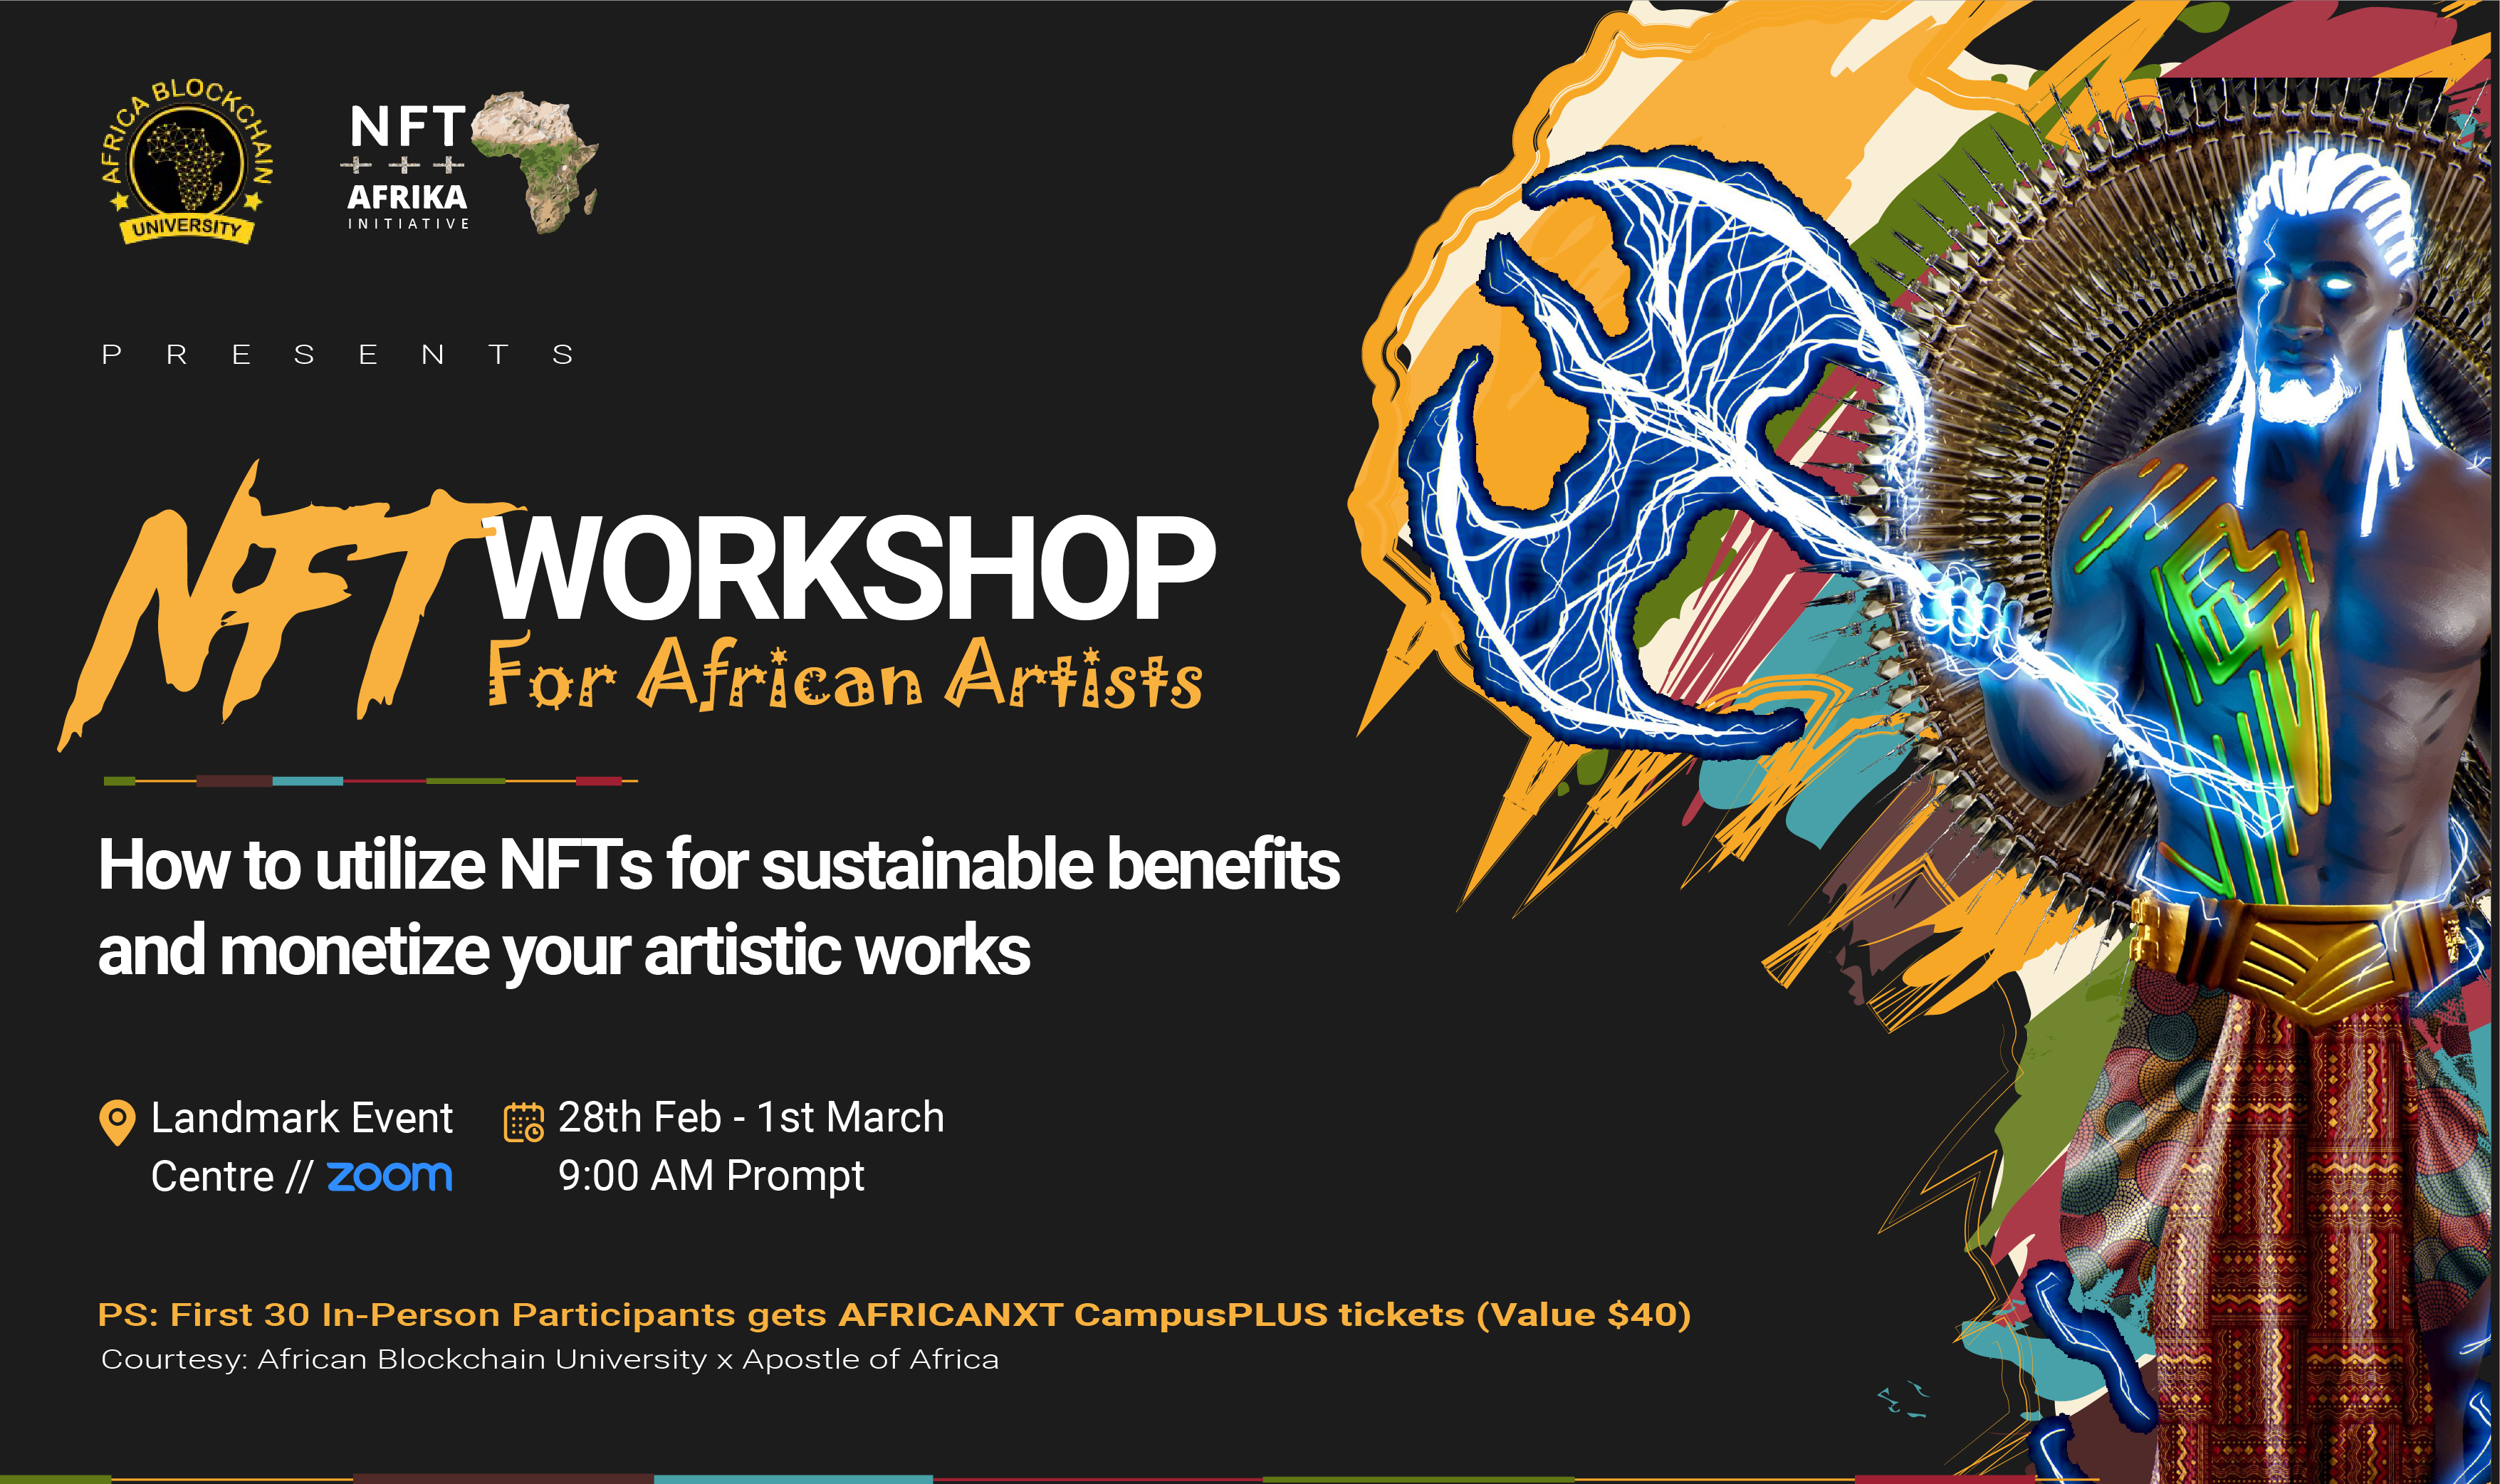 Event: FREE 2days NFT Workshop for African Artists by ABU